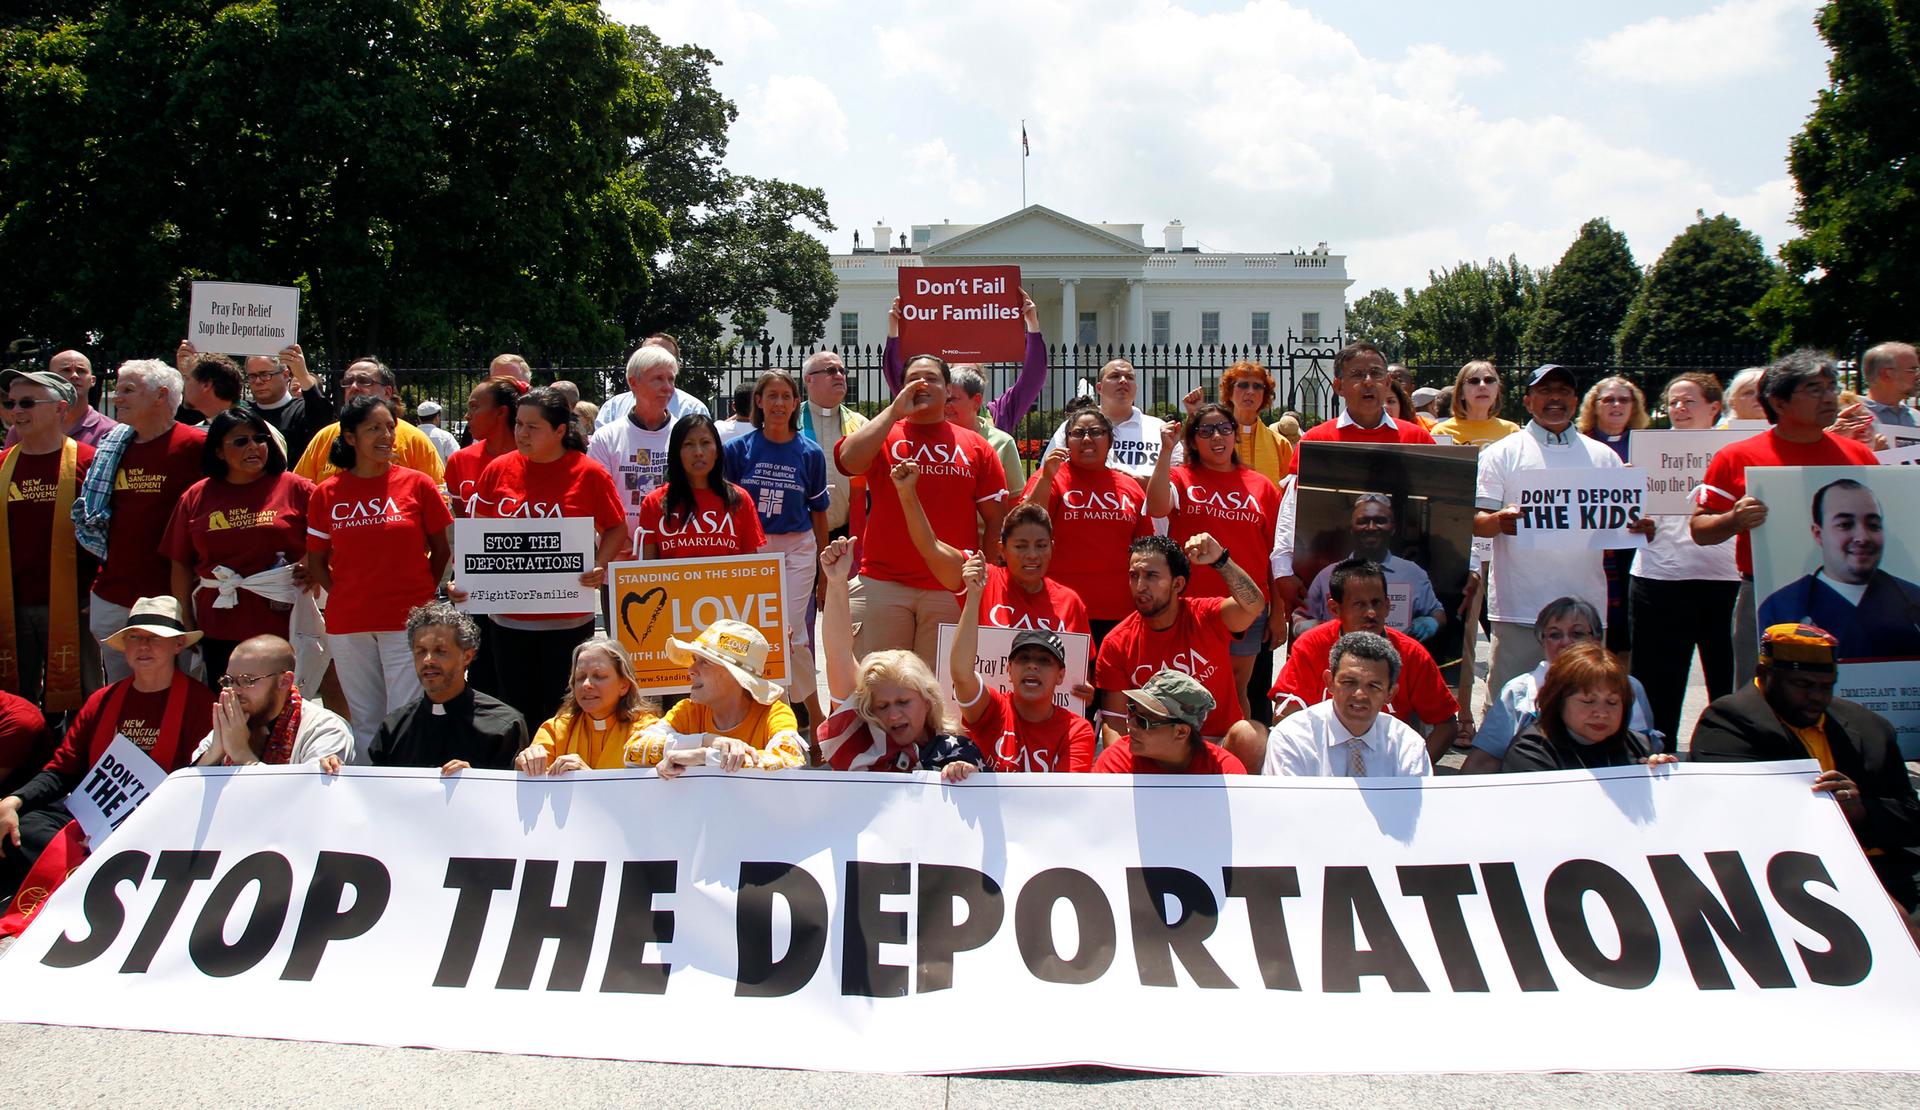 Church groups take part in a protest against President Barack Obama's immigration enforcement policies outside the White House in Washington July 31, 2014. The White House has indicated it will announce a plan to prevent an estimates 5 million from being 